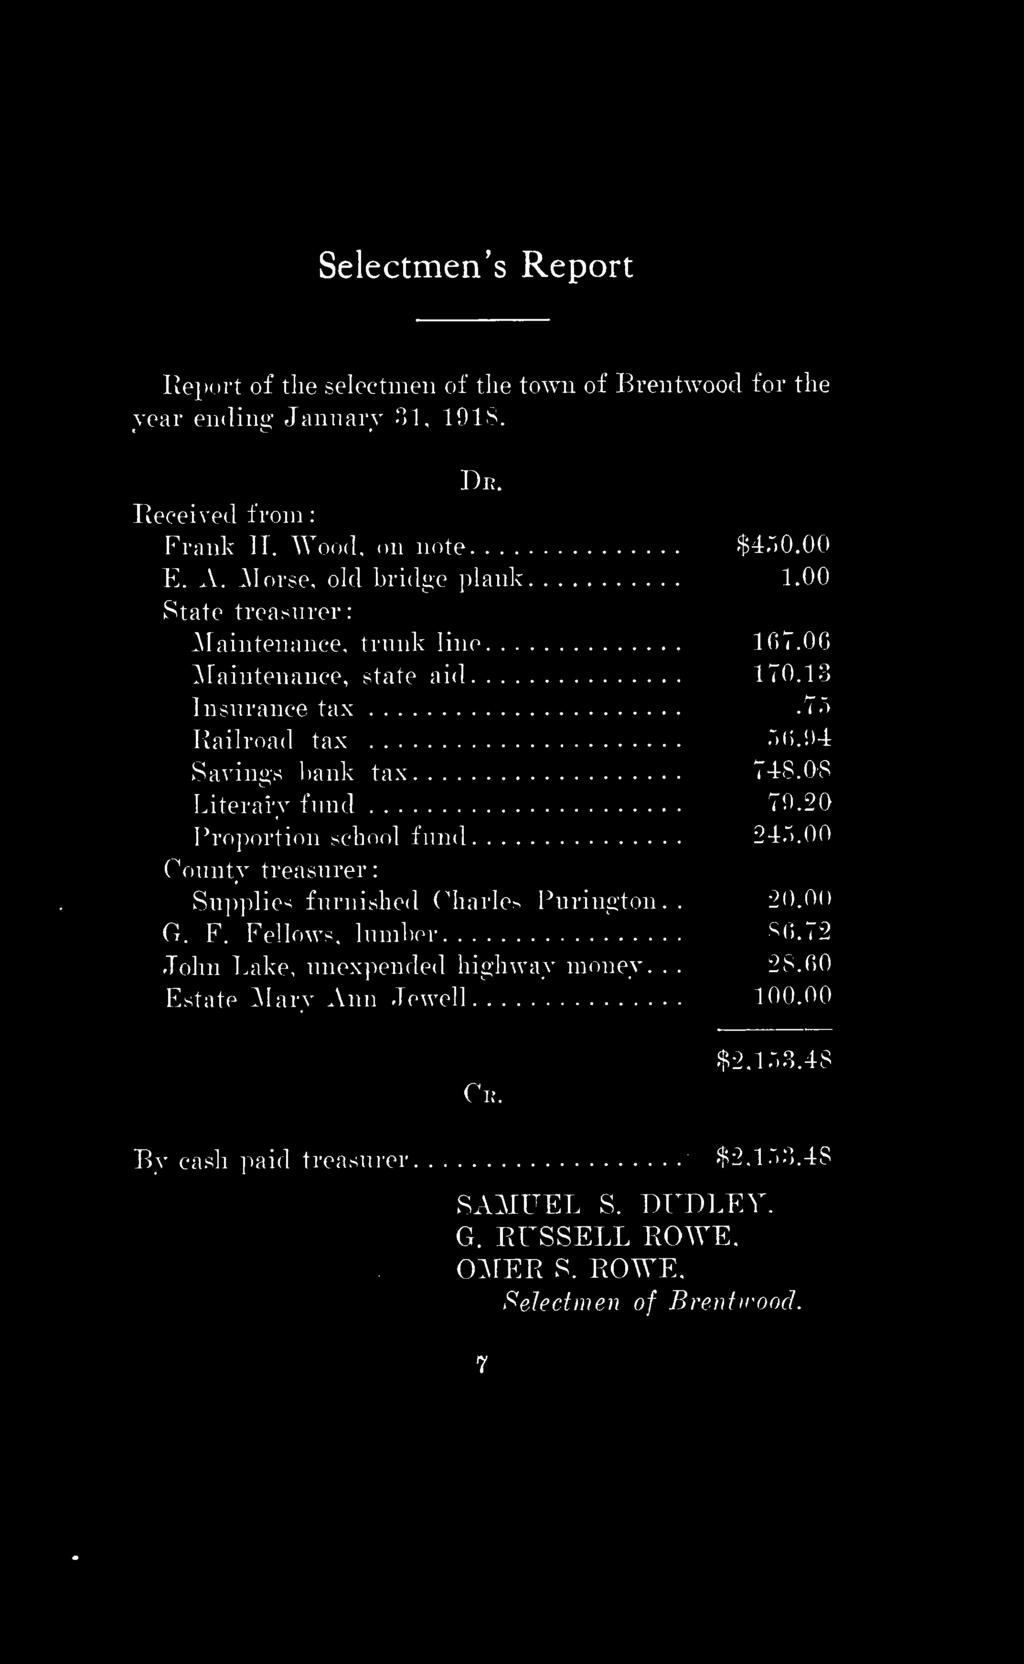 : : Selectmen's Report Report of the selectmen of the town of Brentwood for the year ending January 31, 1918. Dr. Received from Frank IT. Wood, on note $450.00 E. A. Morse, old bridge plank 1.